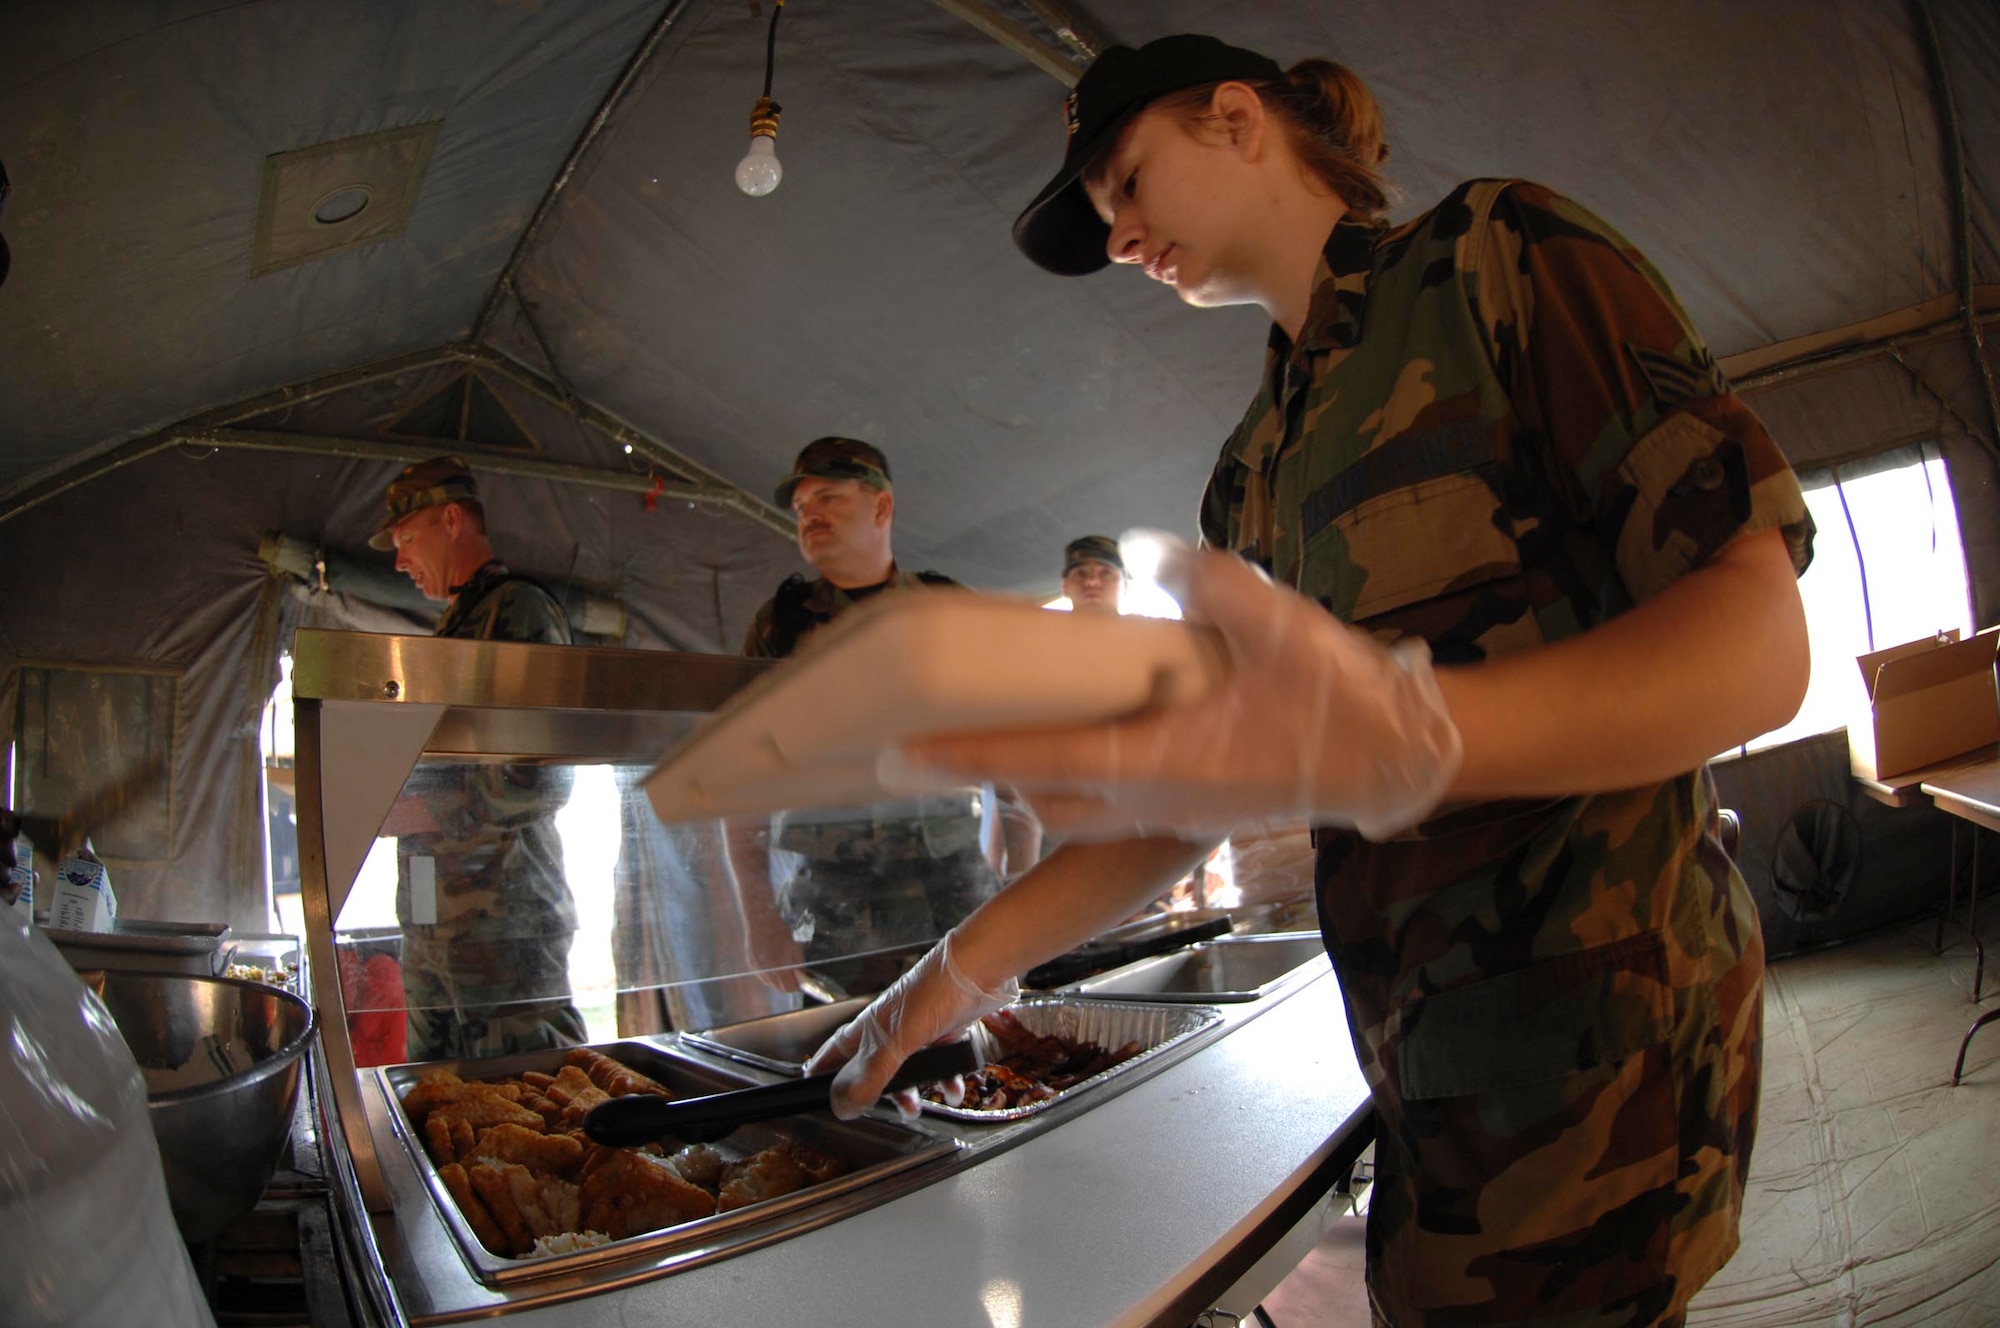 SHAW AIR FORCE BASE, S.C. -- Senior Airman Rachel Dunsmore, 20th Services Squadron food specialist, serves breakfast to members of the 20th Civil Engineer Squadron from a field kitchen during a field training exercise May 22. As part of the four-day FTX the 20th CES trained in self-aid buddy care, cardiopulmonary resuscitation, weapons safety, decontamination, security, land navigation, night operations and any job-specific training required. (U.S. Air Force photo by Airman First Class Kathrine McDowell)